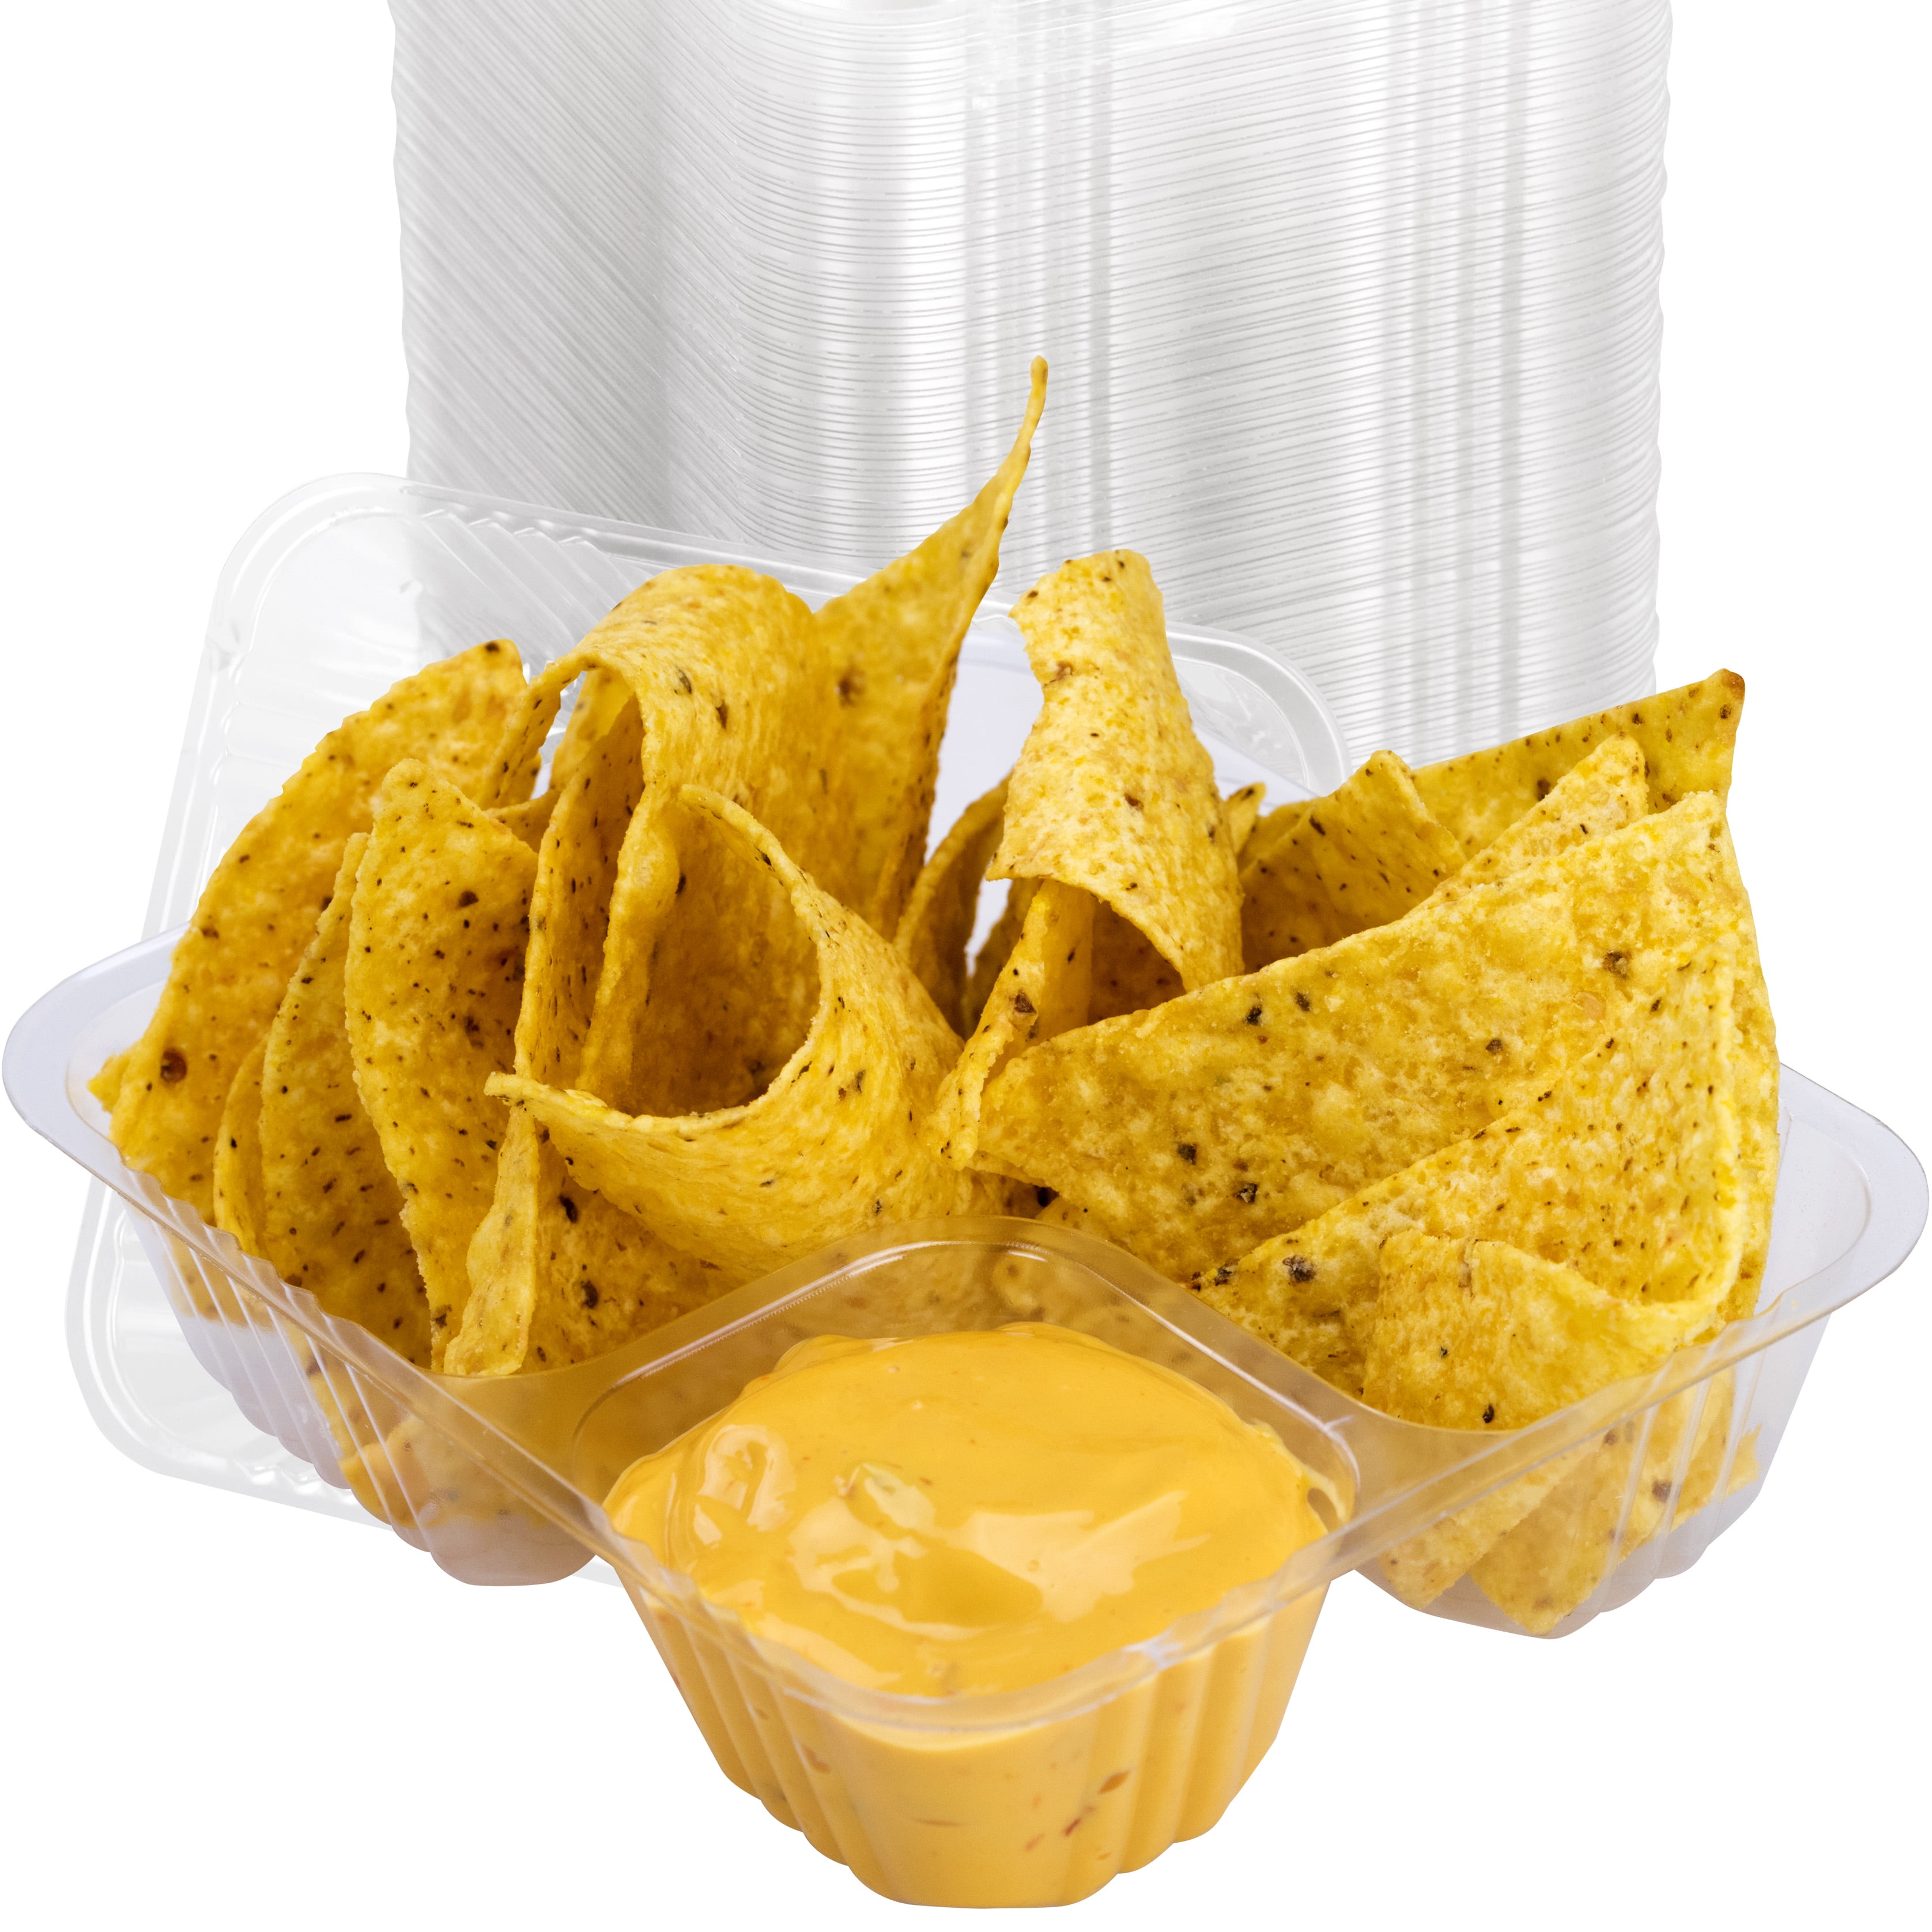 Details about   No-Spill 6x8 Disposable Clear Plastic Nacho Tray Value Pack by Avant Grub 